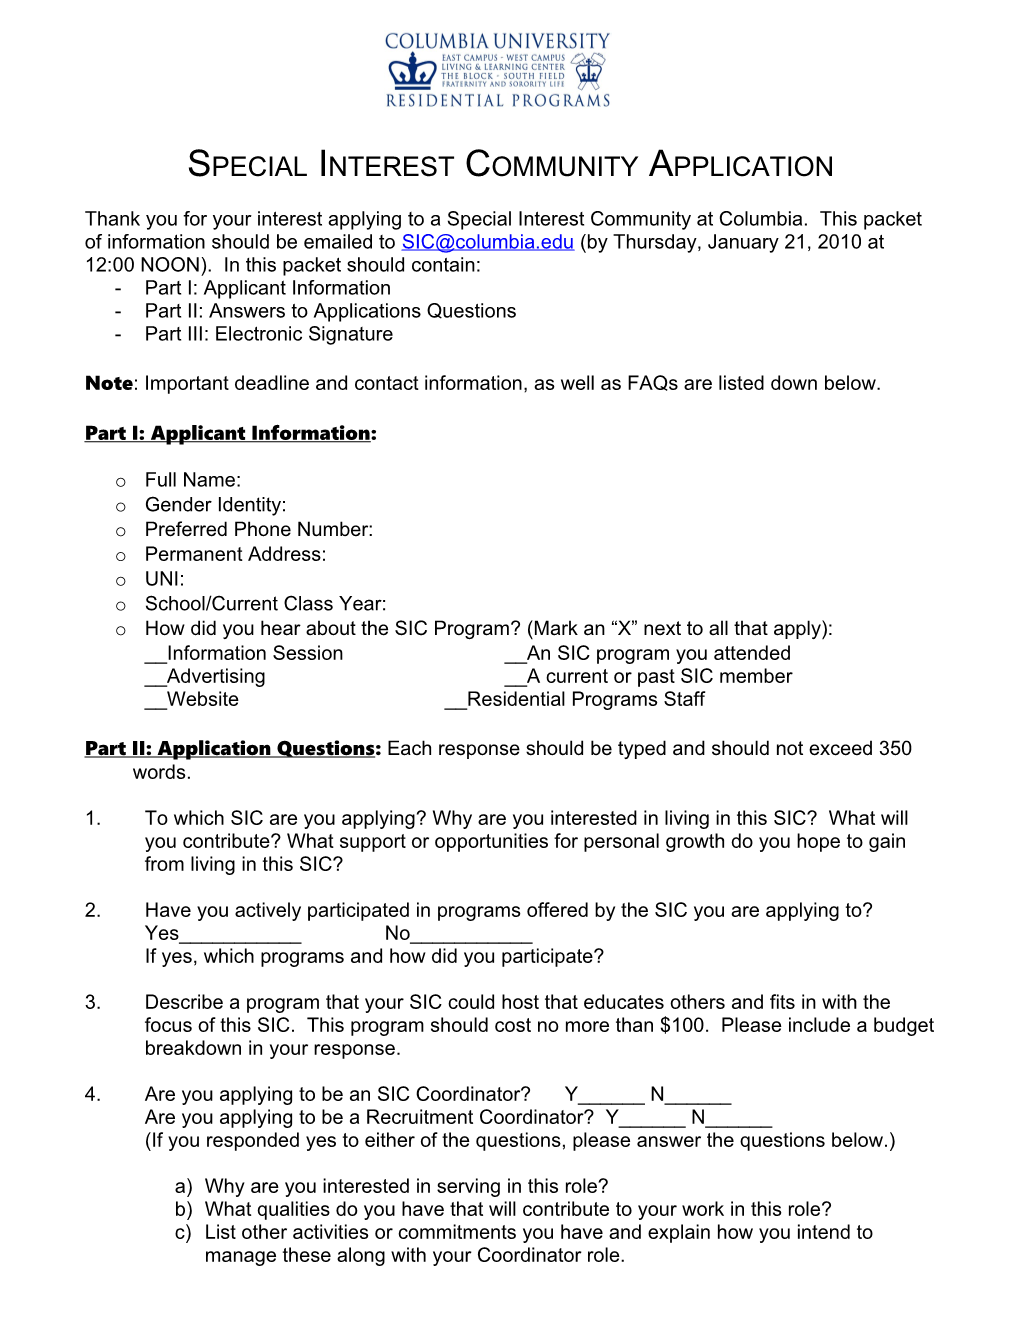 Special Interest Community Application